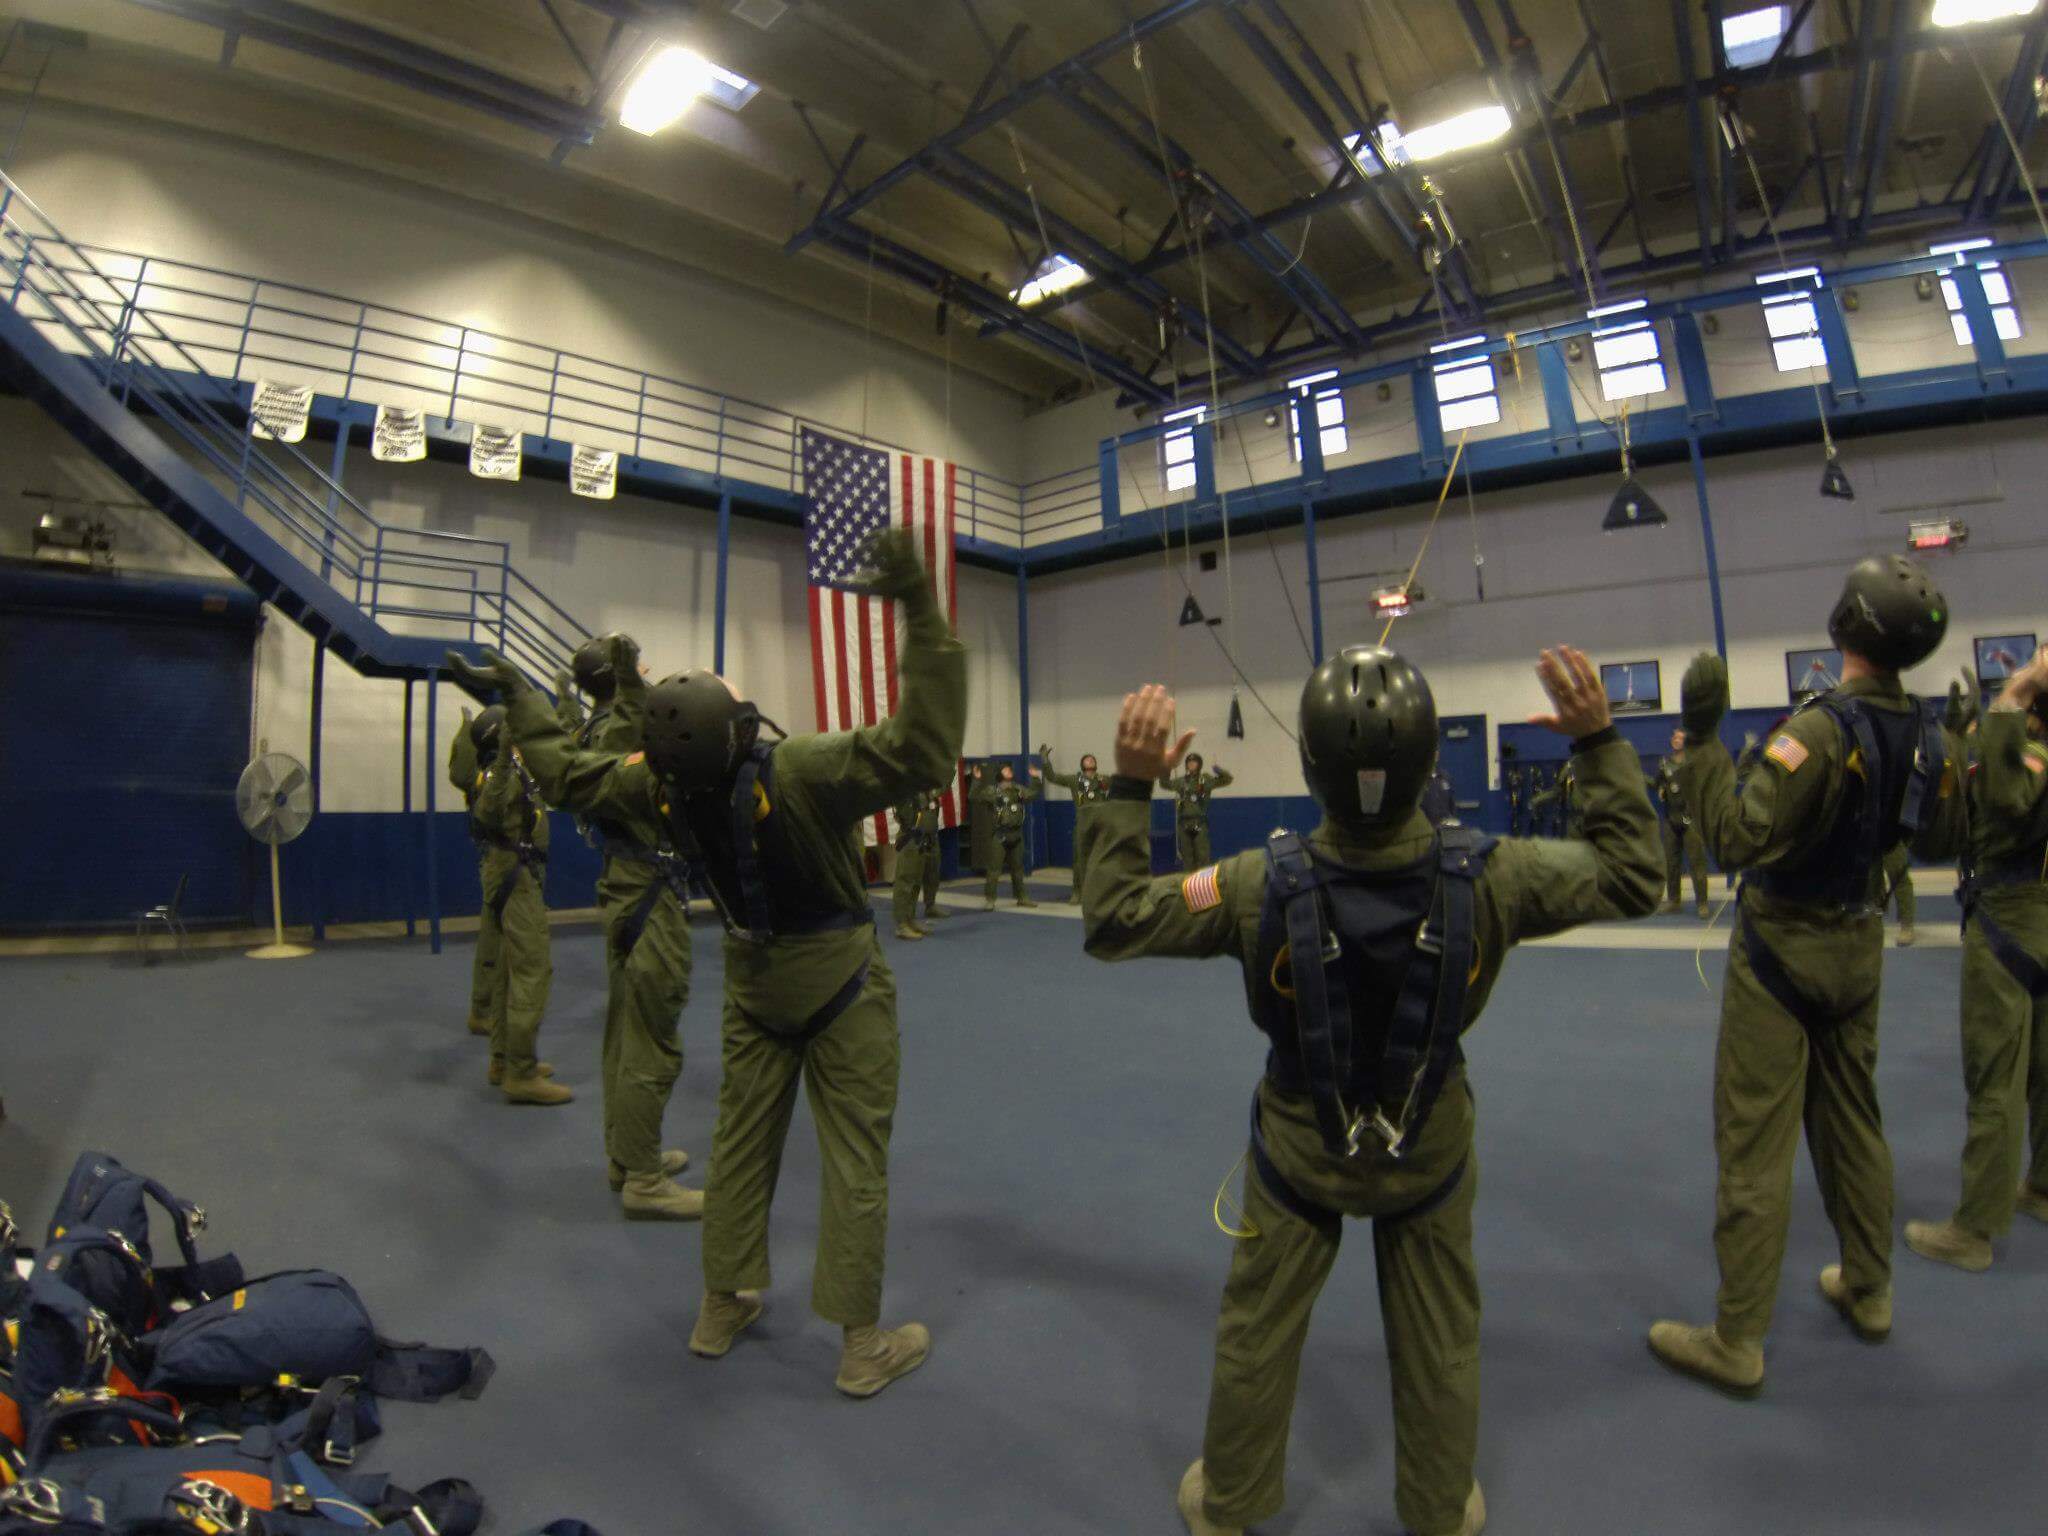 Cadets in hanger wearing flight suits and helmets